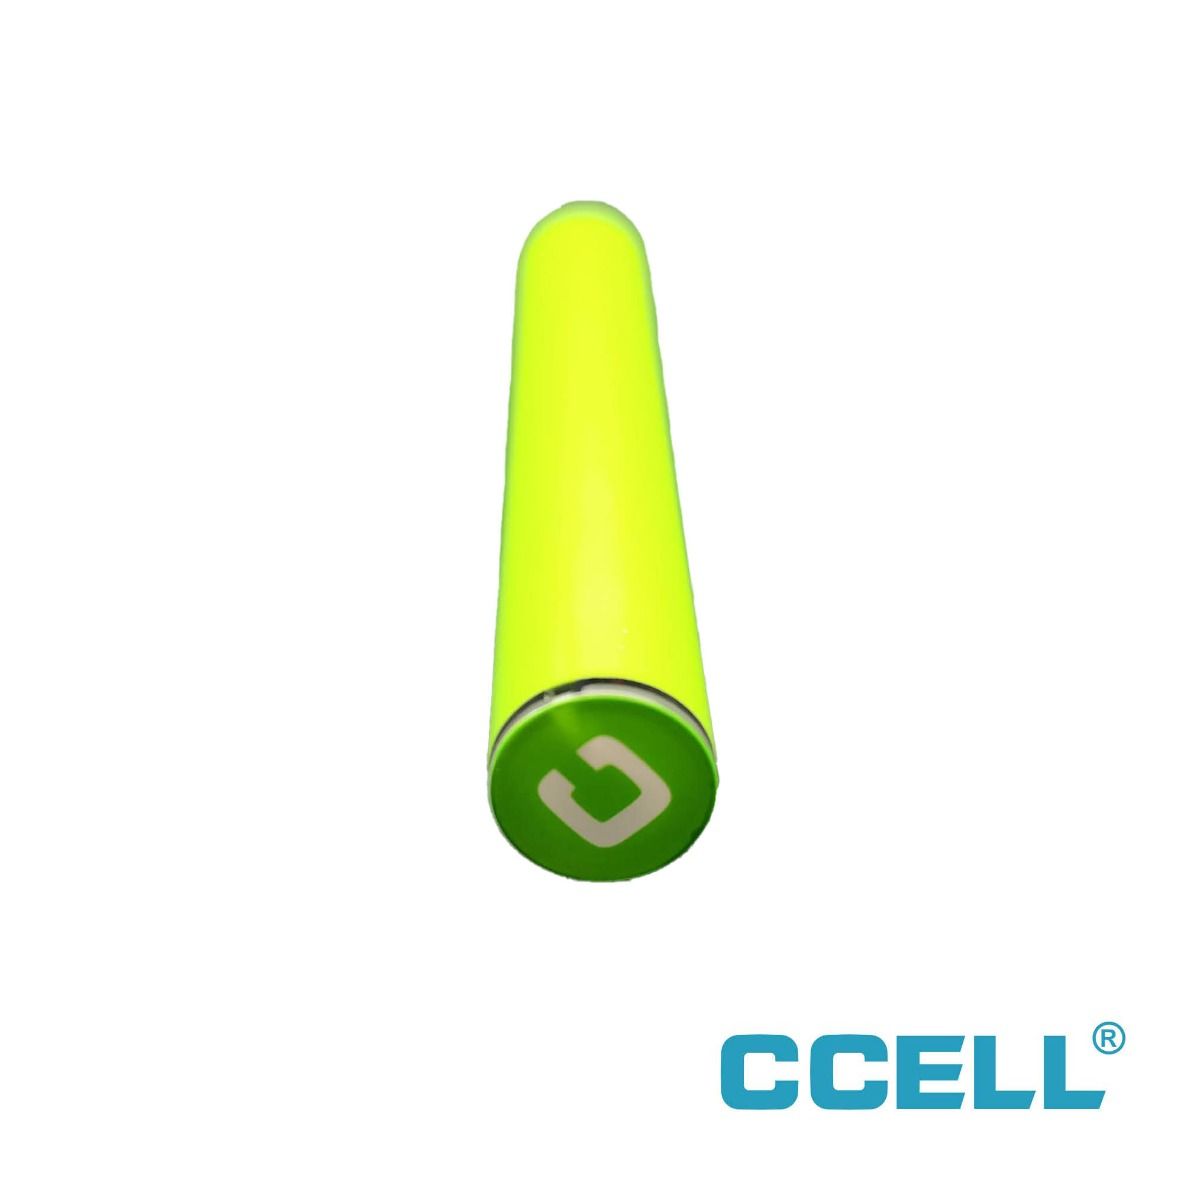 CCell-510 Battery- Trulieve Green